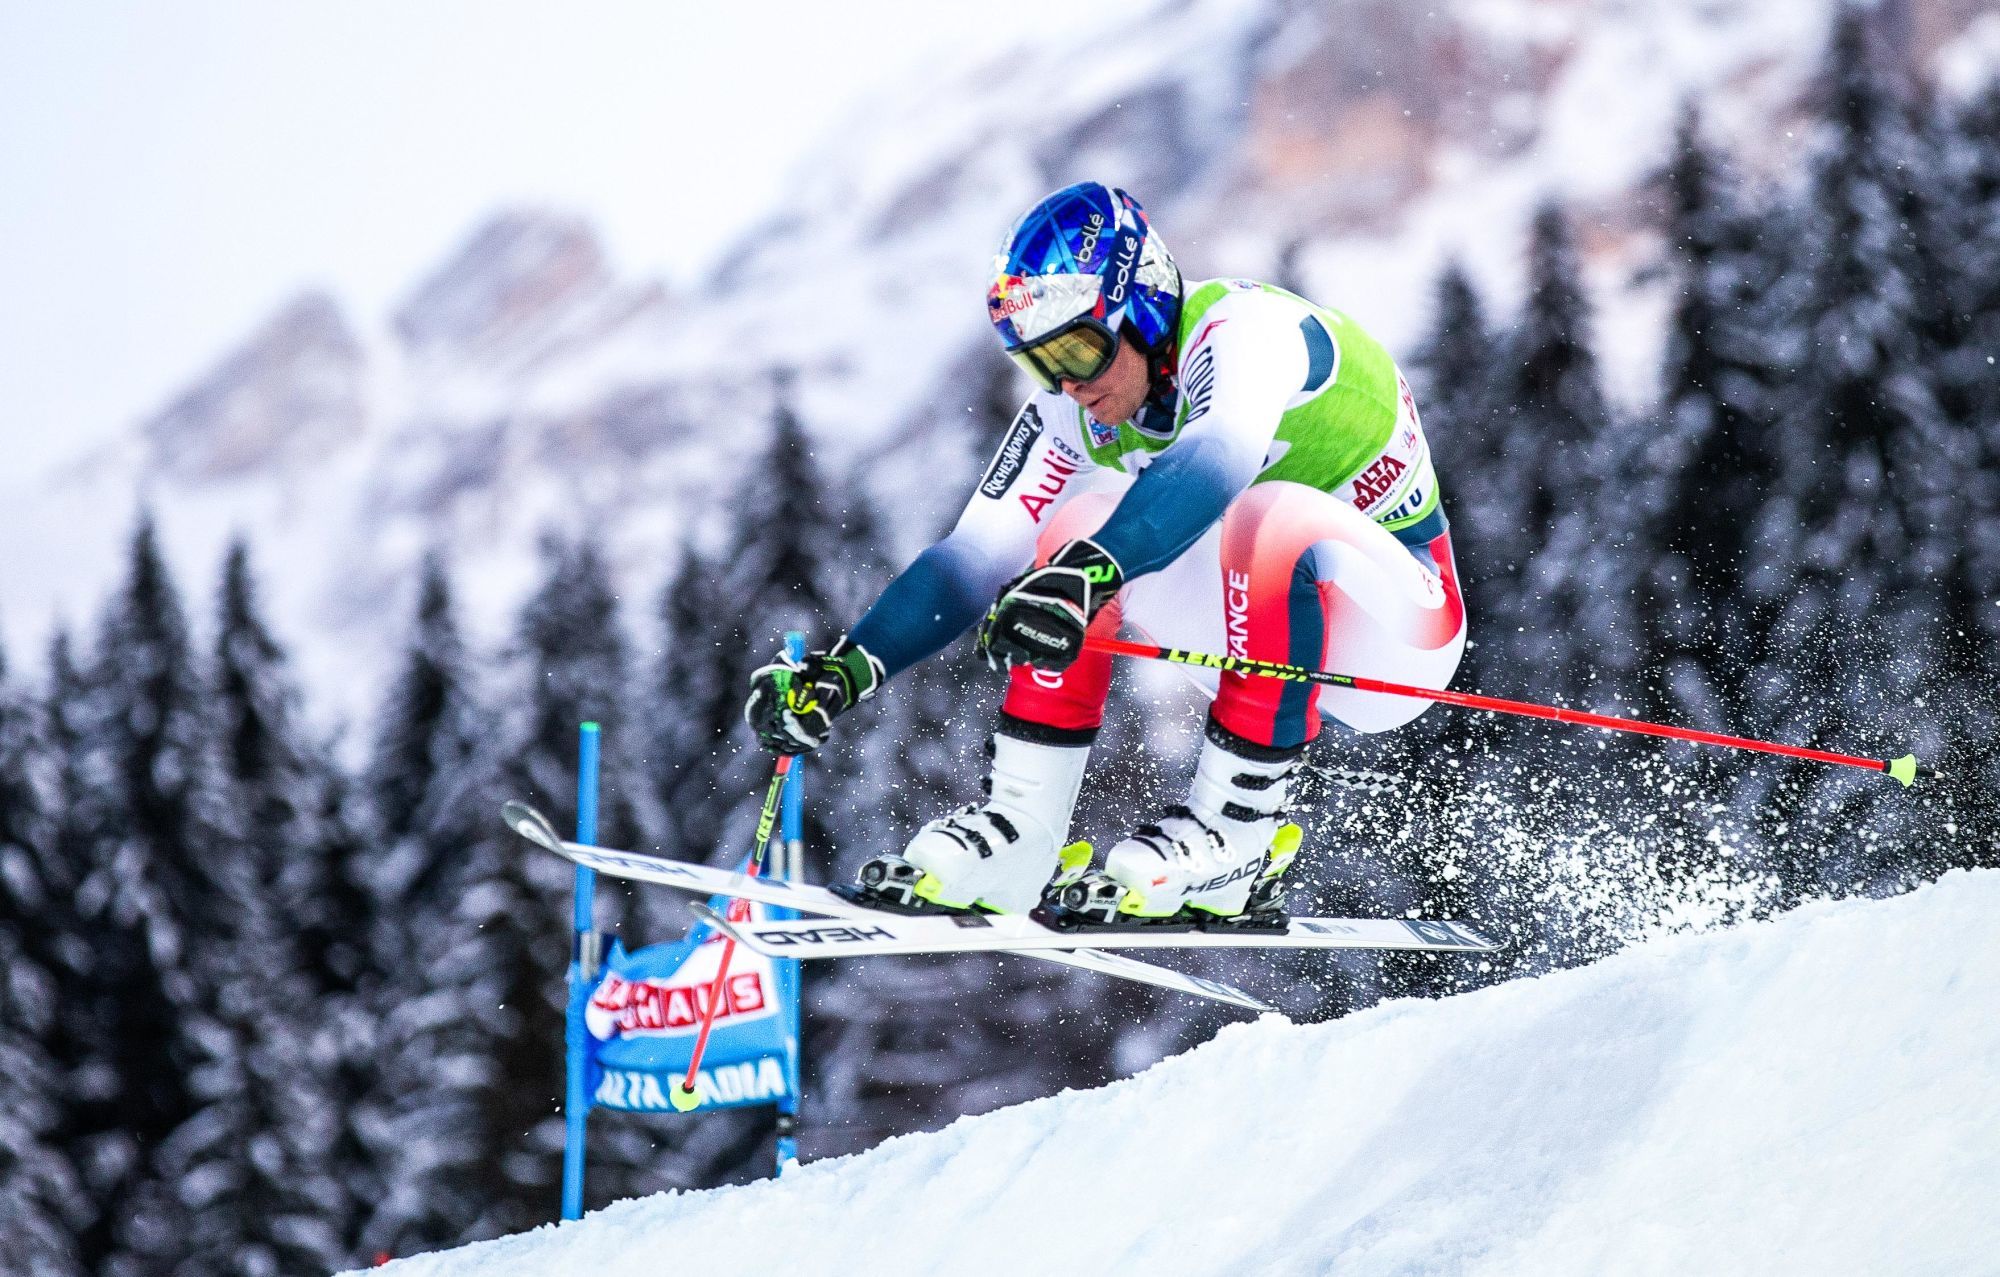 Alexis Pinturault (FRA). Photo: GEPA pictures/ Harald Steiner / Icon Sport